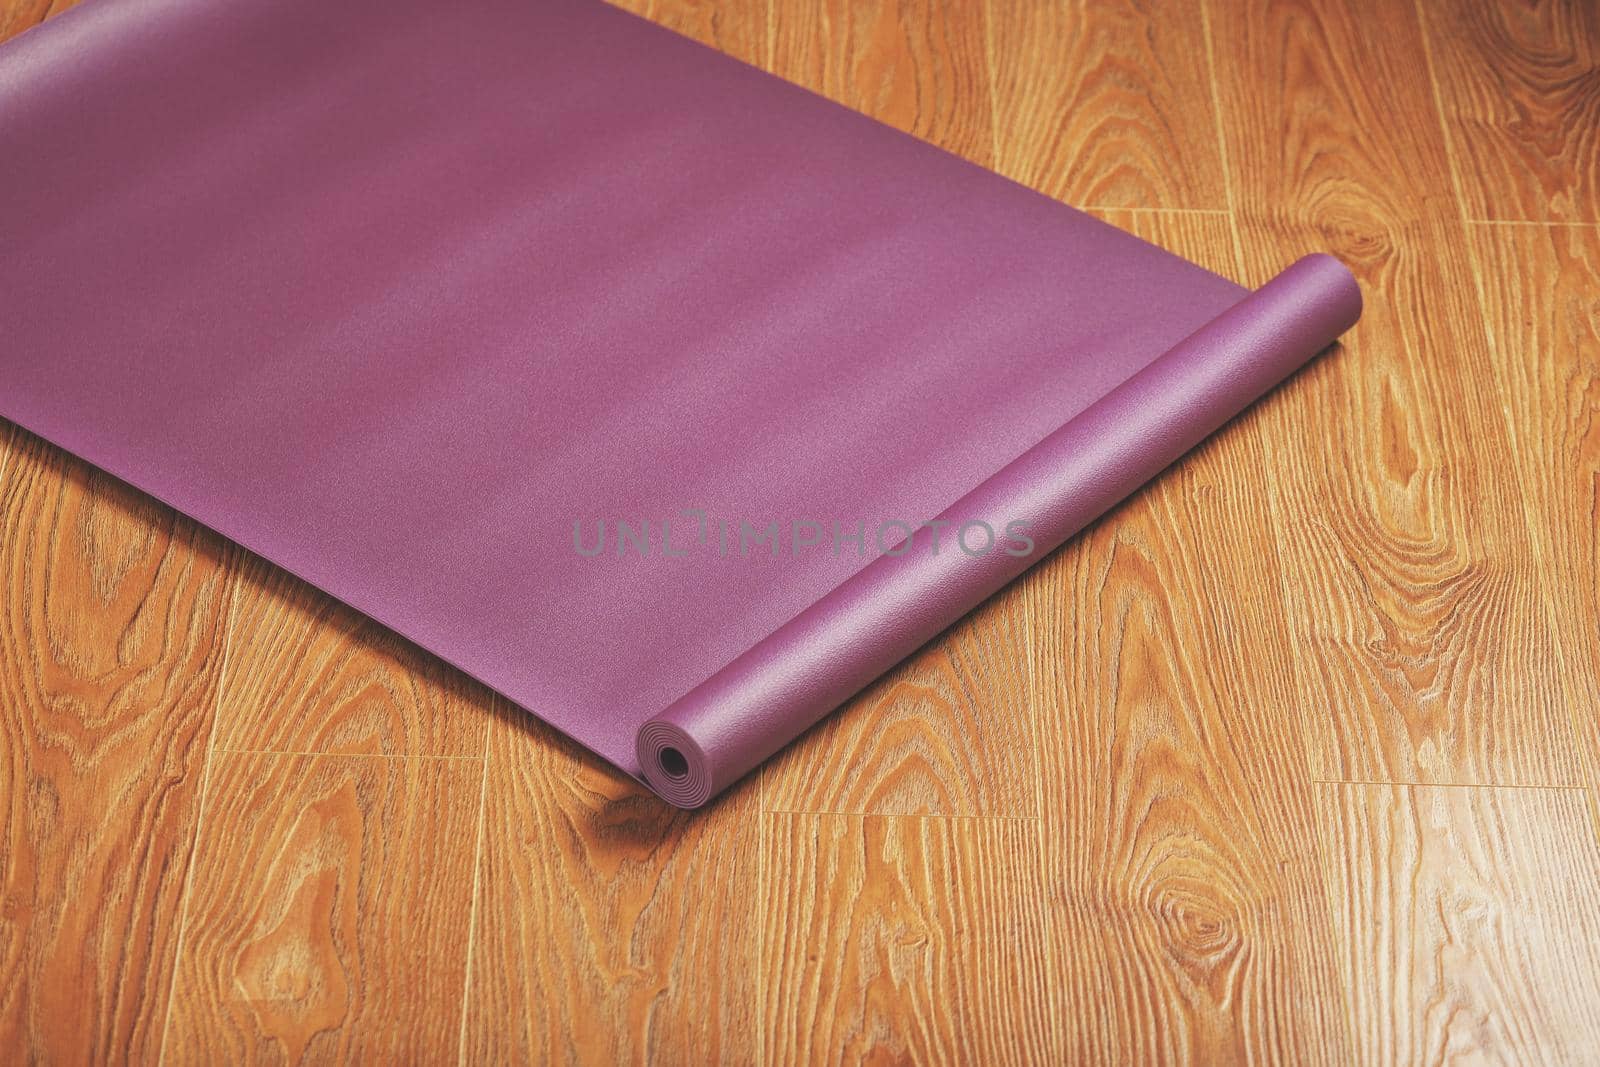 Purple yoga and fitness mat on wooden floor by AlexGrec